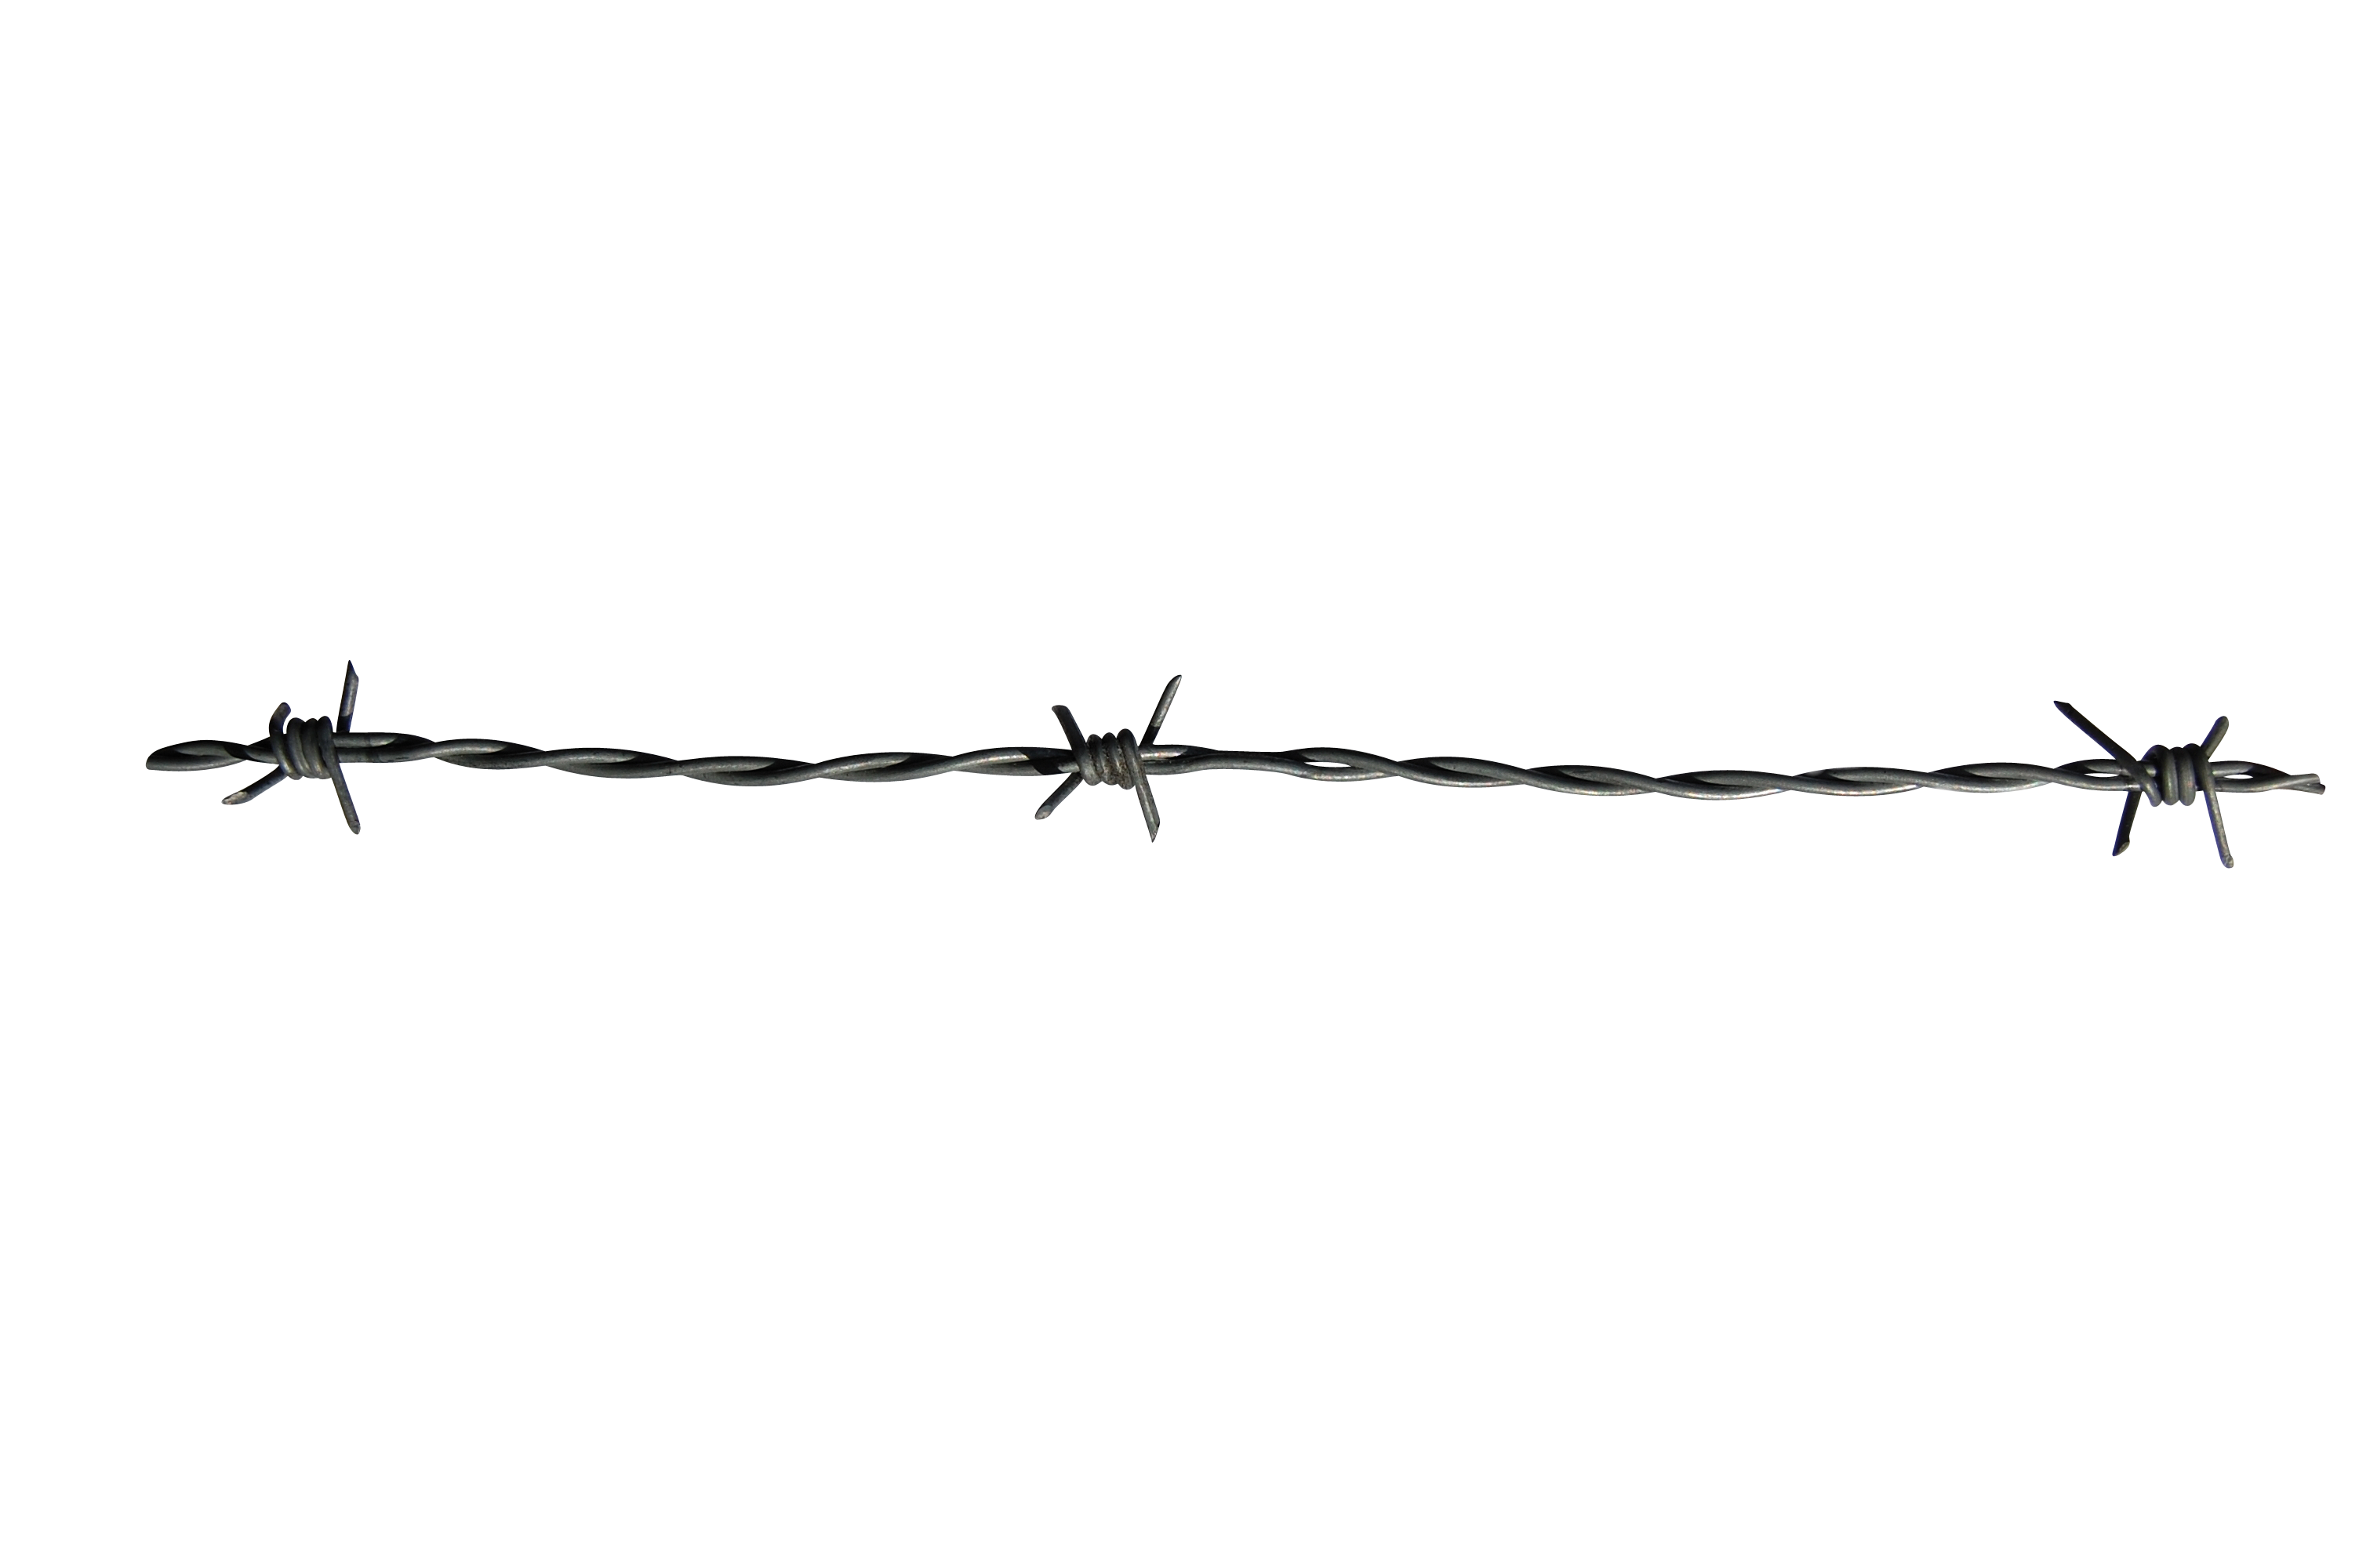 Wire PNG